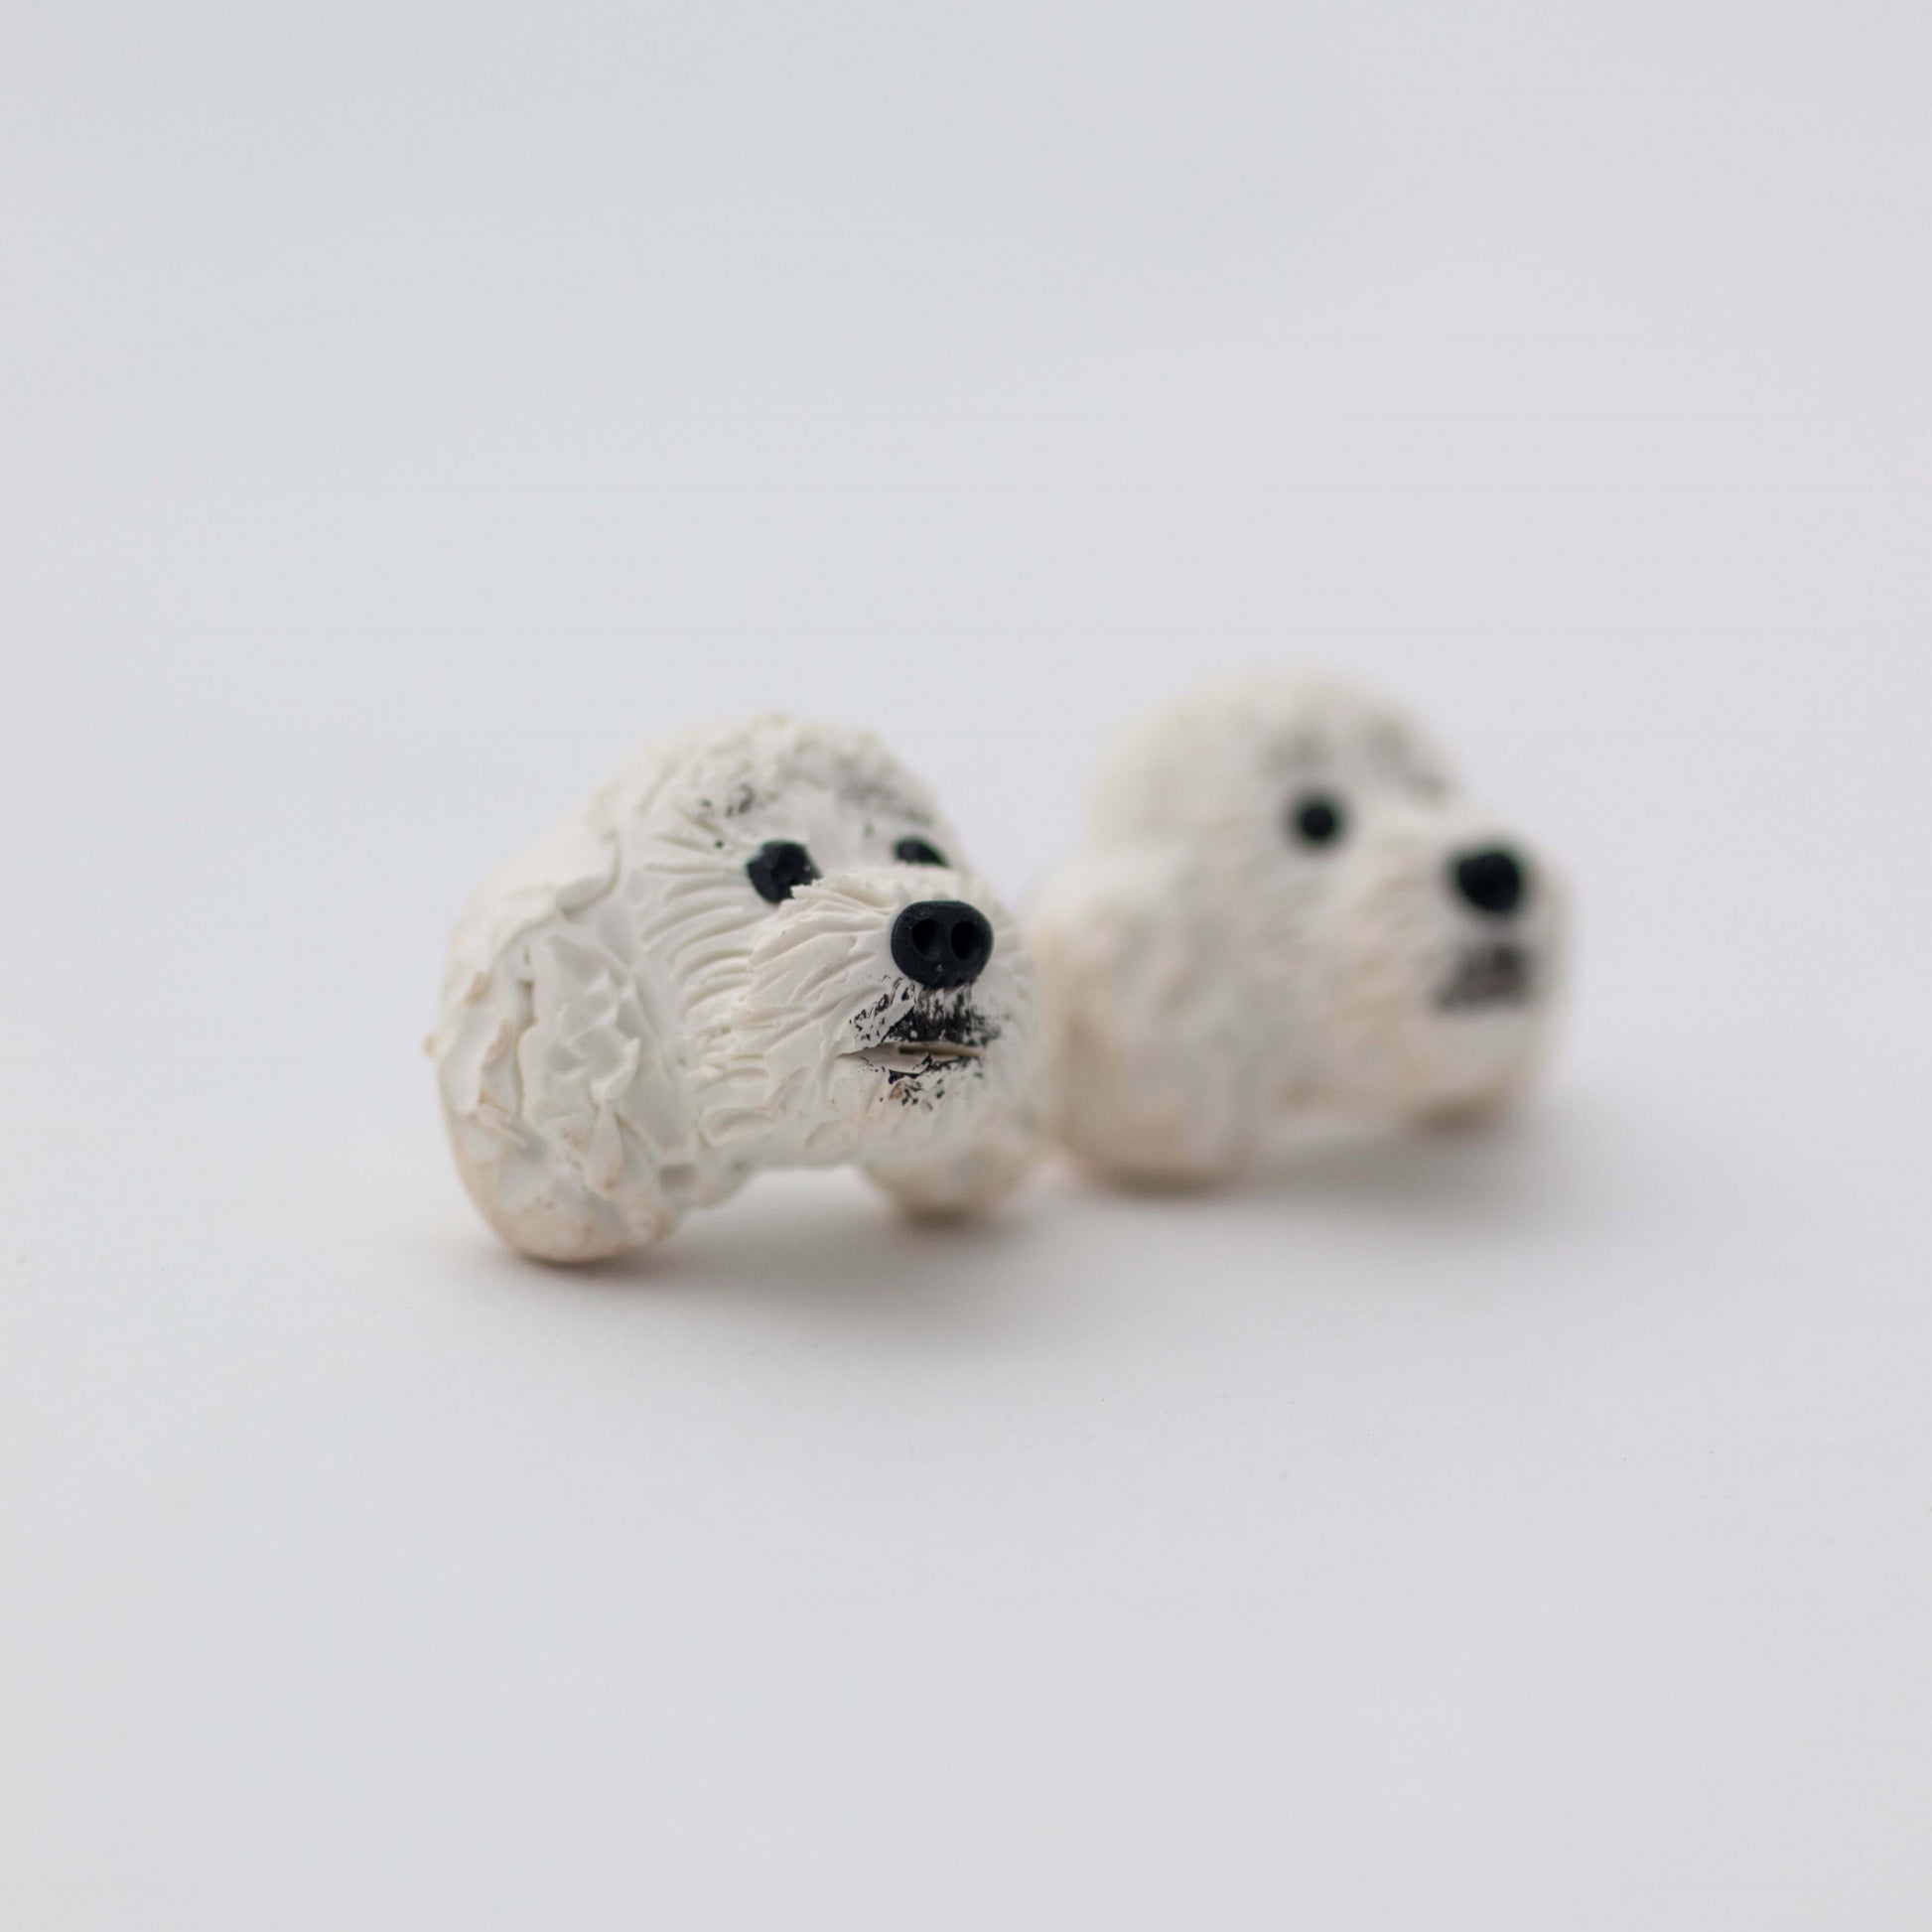 Handmade white poodle stud earrings by Pawfect Love, with white background